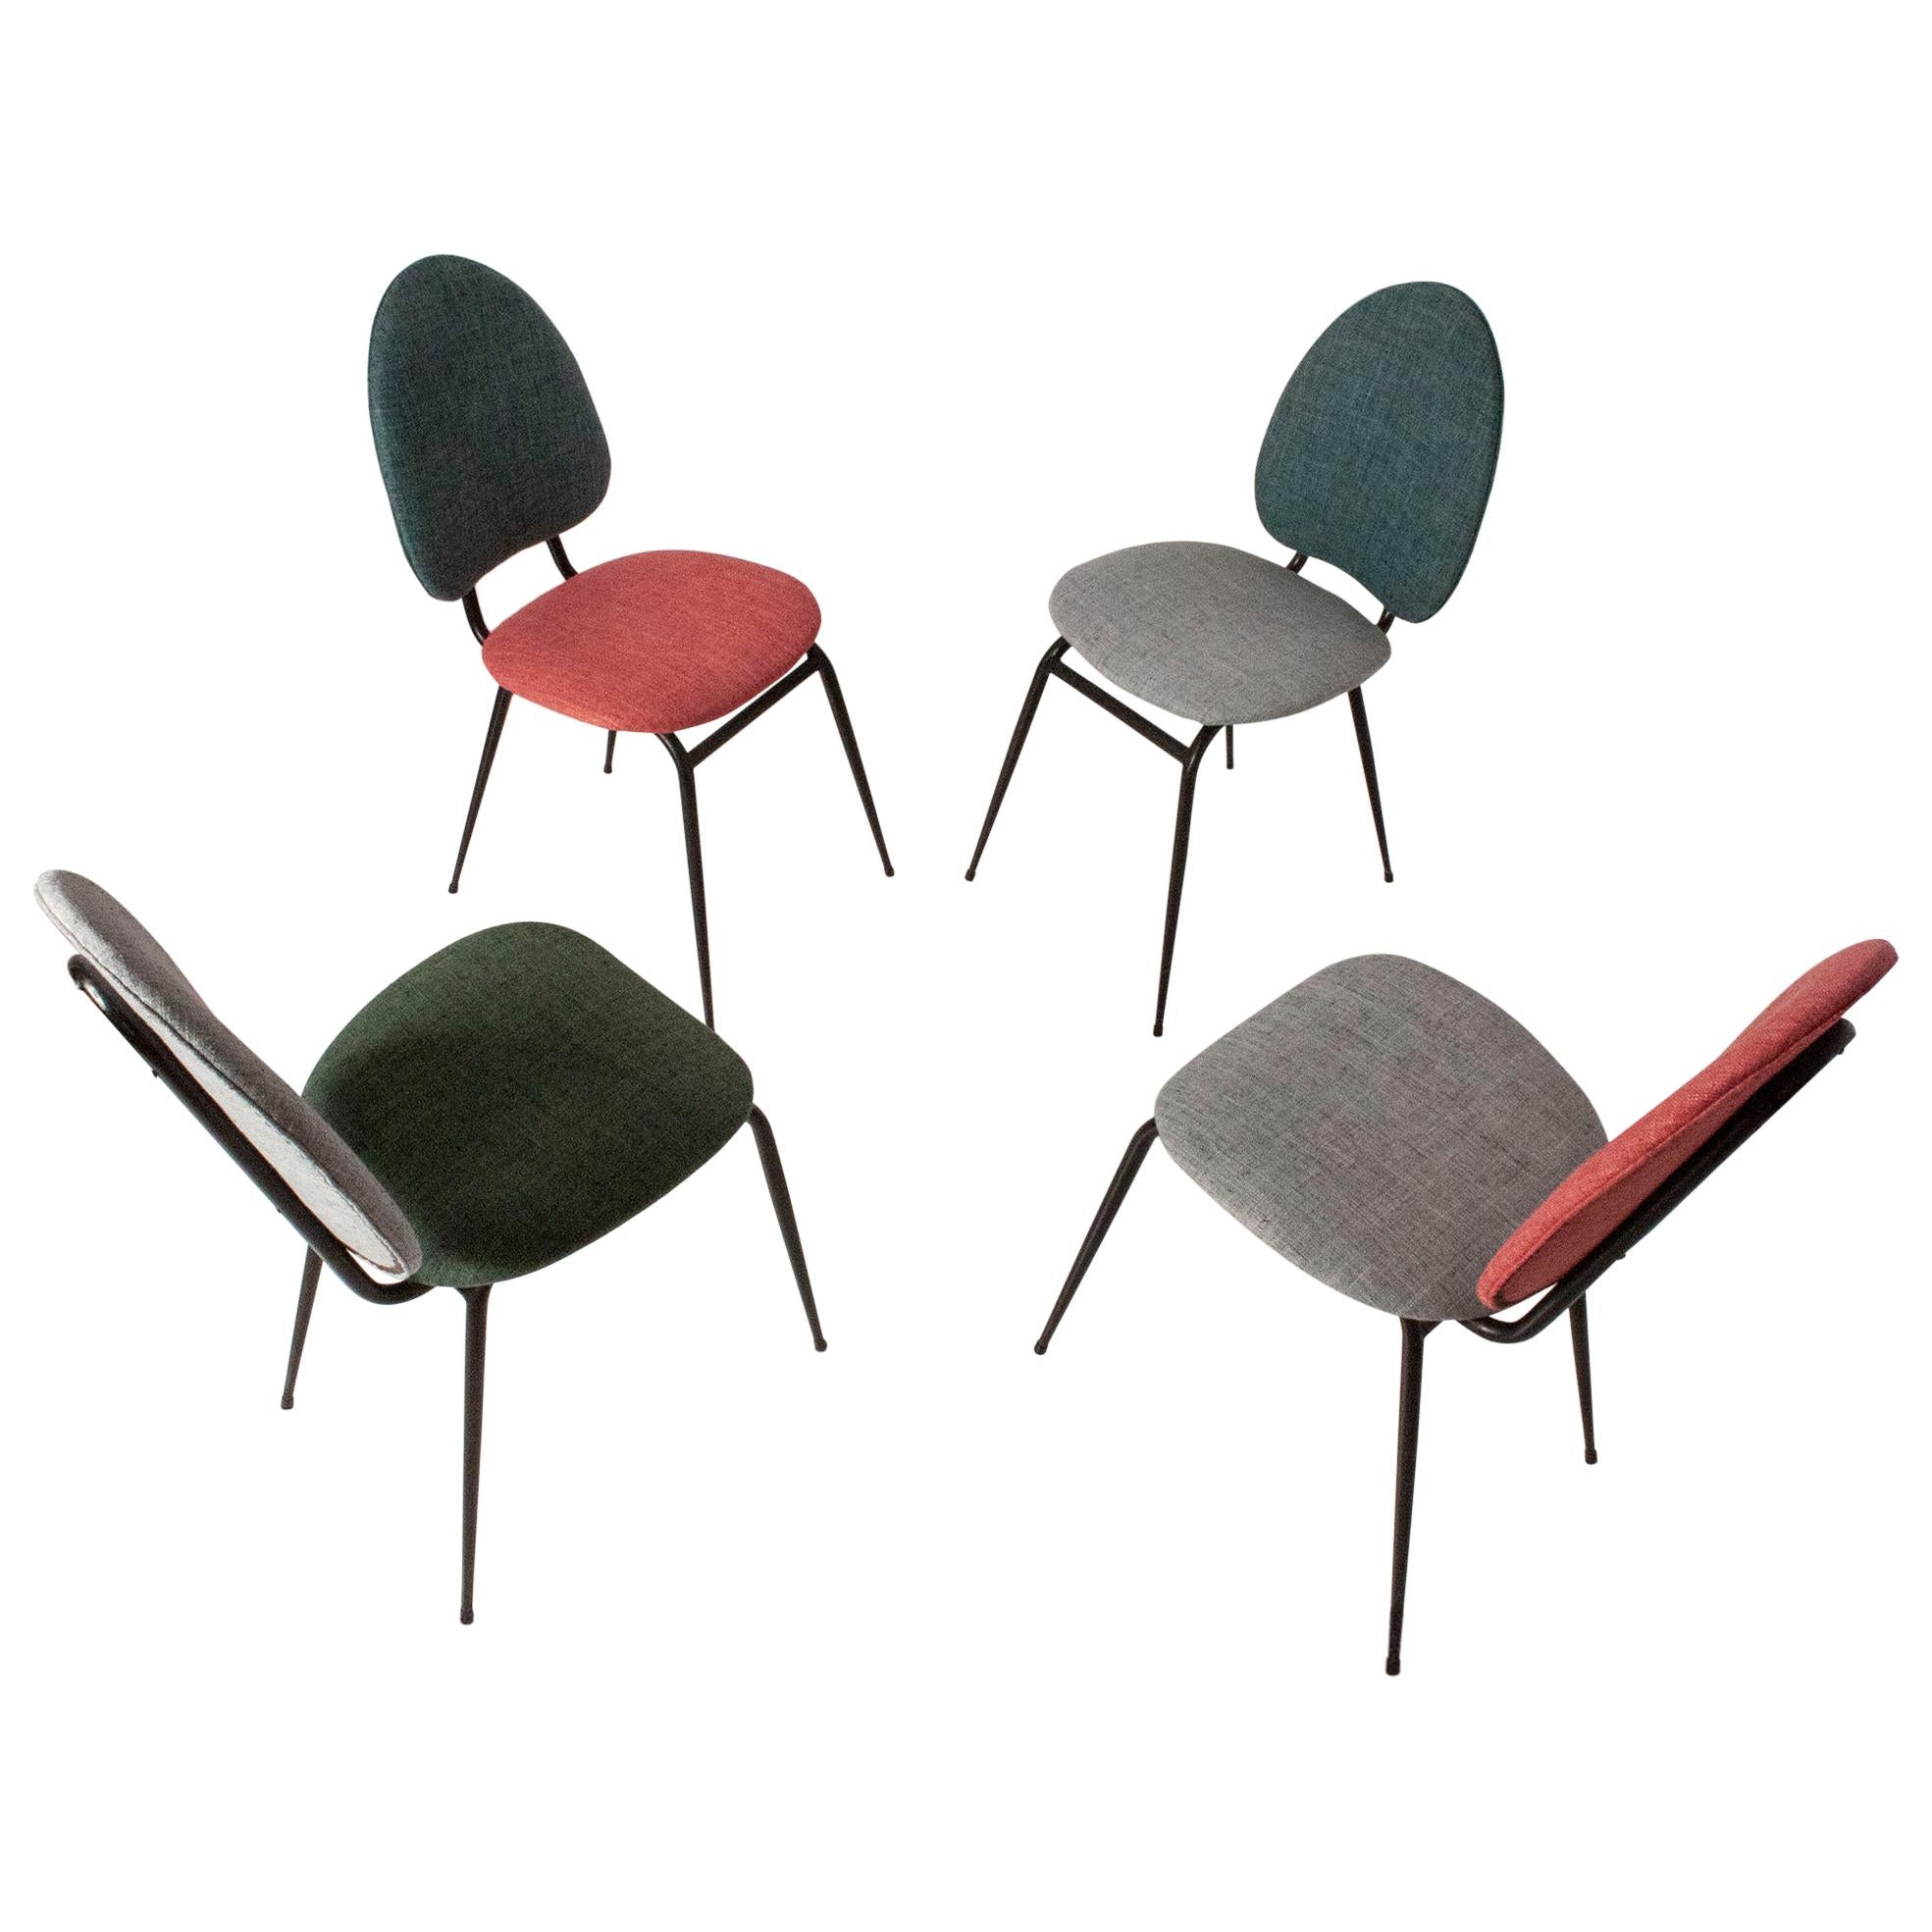 Set of Four Dining Chairs, in Various Colors, Spain, 1950s